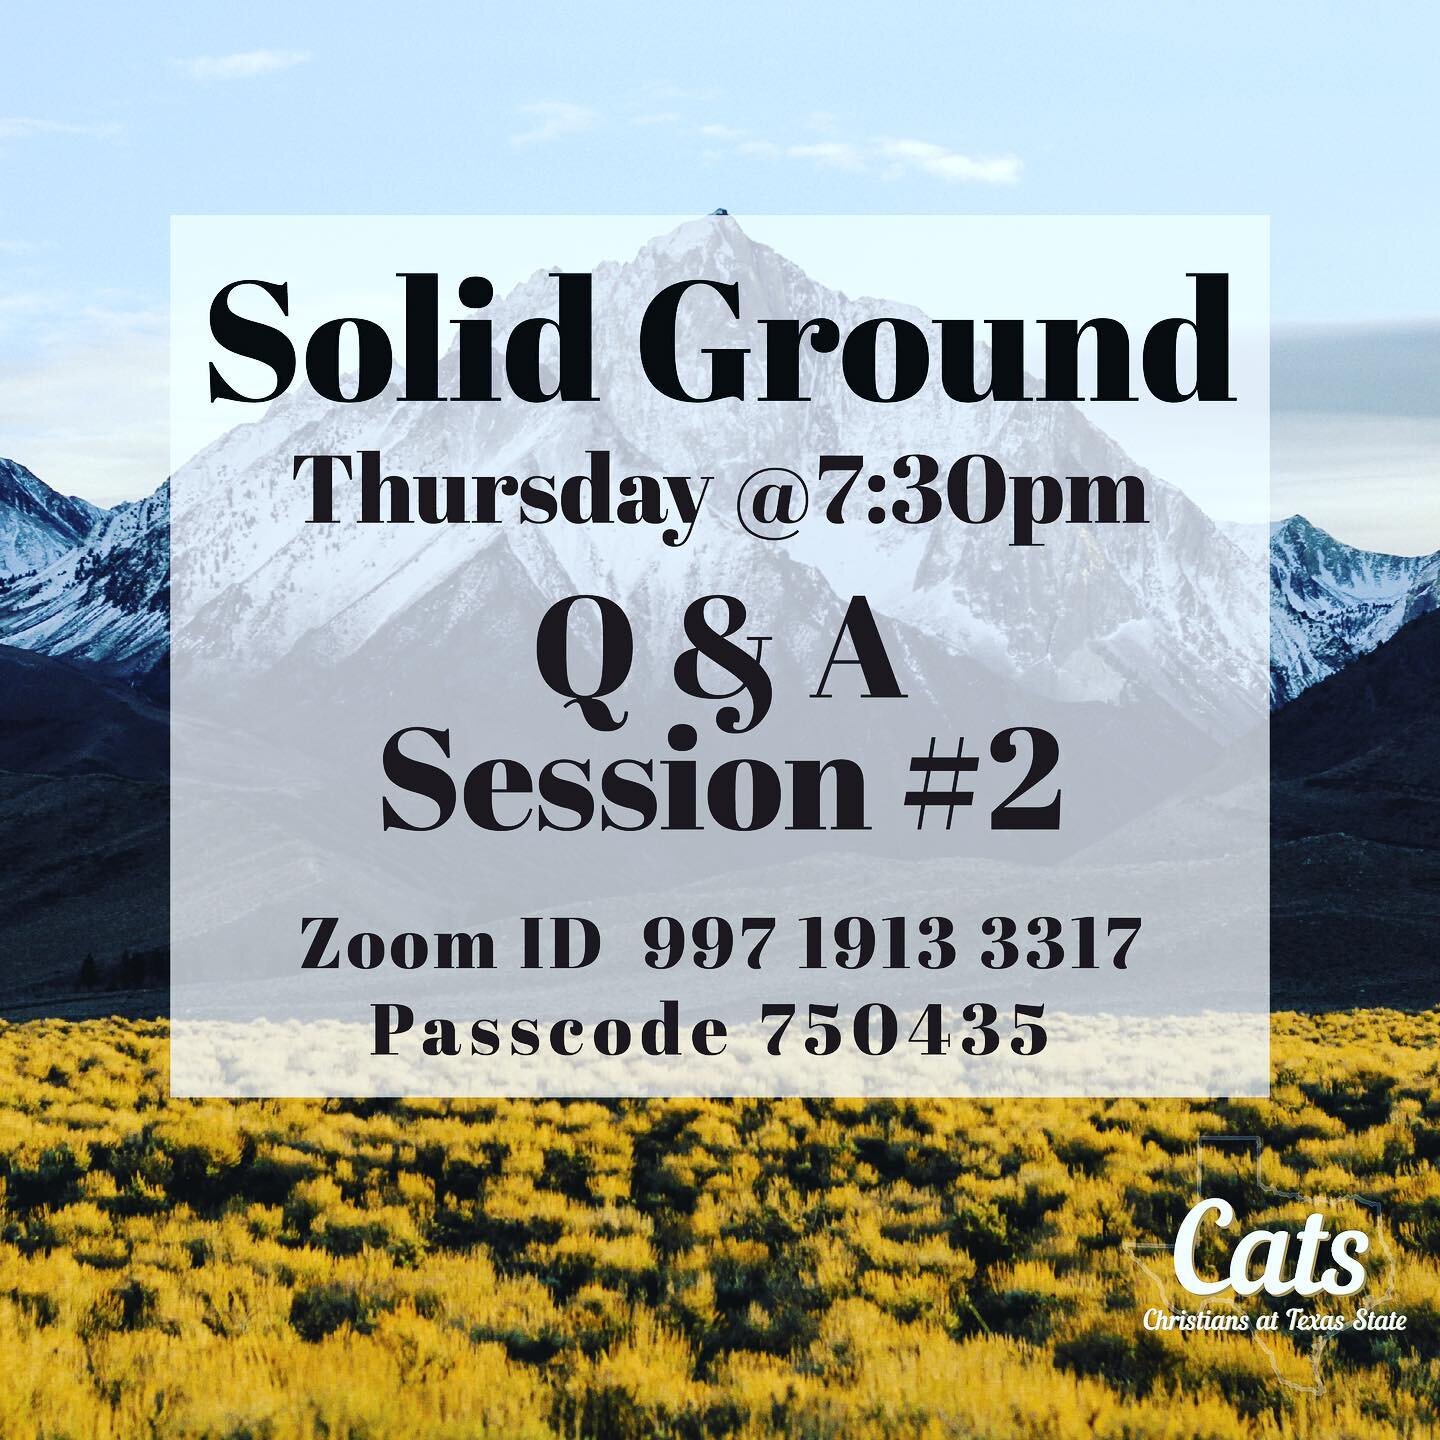 Let&rsquo;s go for round two! Join us for our last Solid Ground of the semester! #theexcellent #solidground #jesus #roundtwoask #lastone #qanda